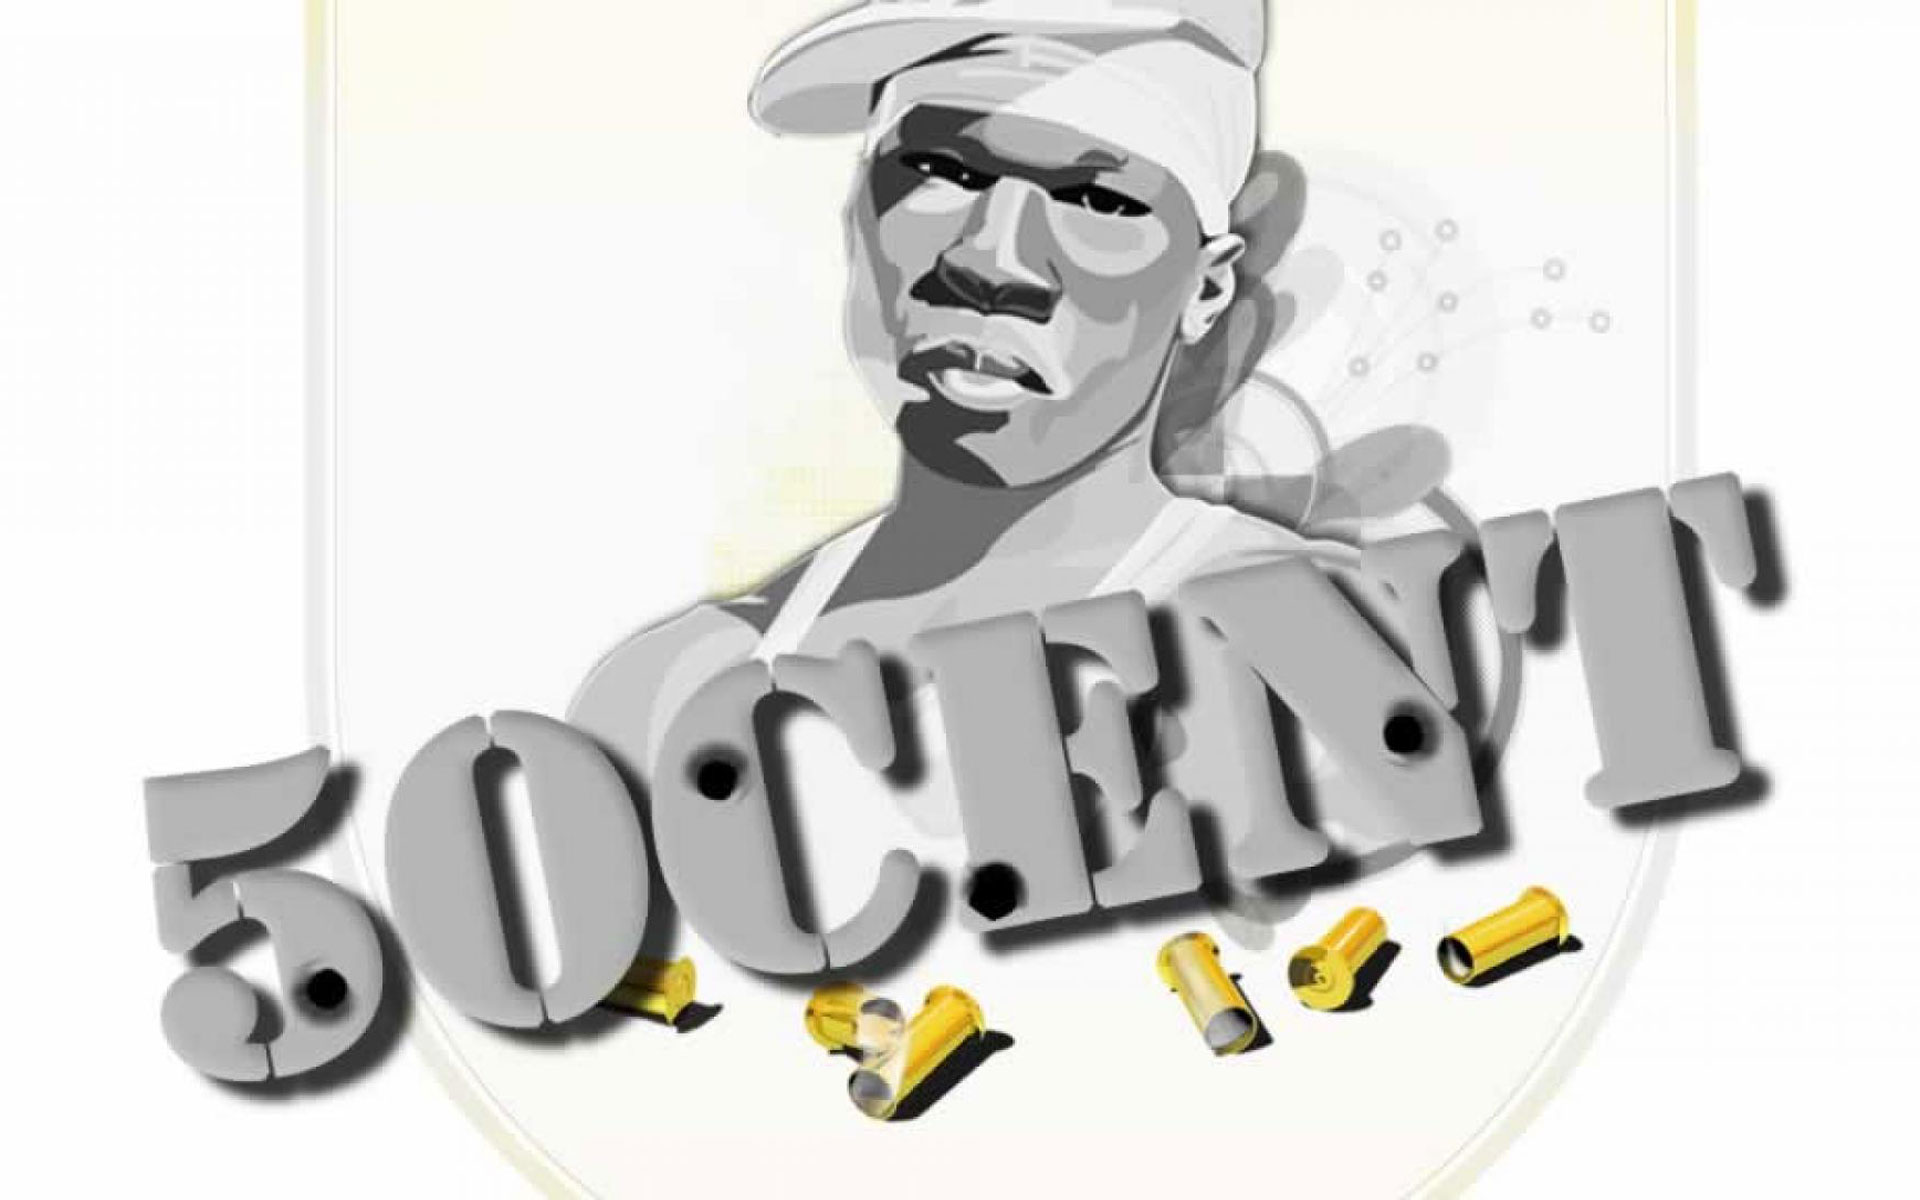 Music 50 Cent HD Wallpaper | Background Image